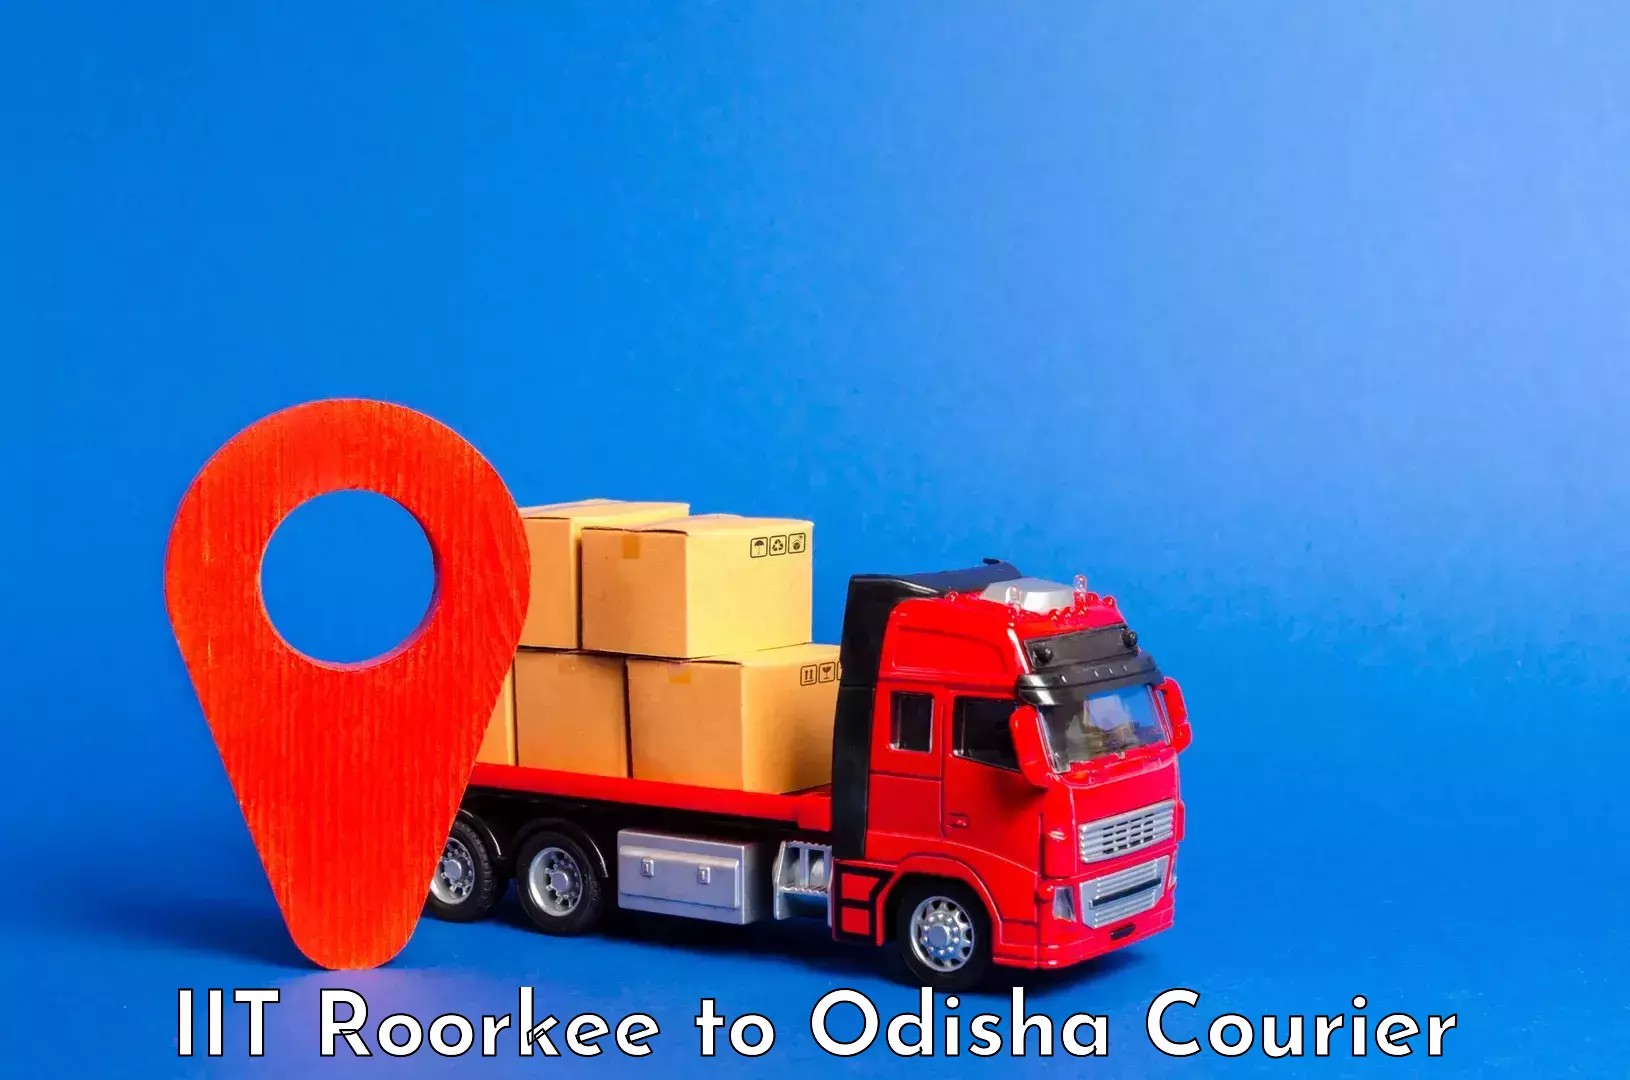 Luggage shipment tracking IIT Roorkee to Pipili